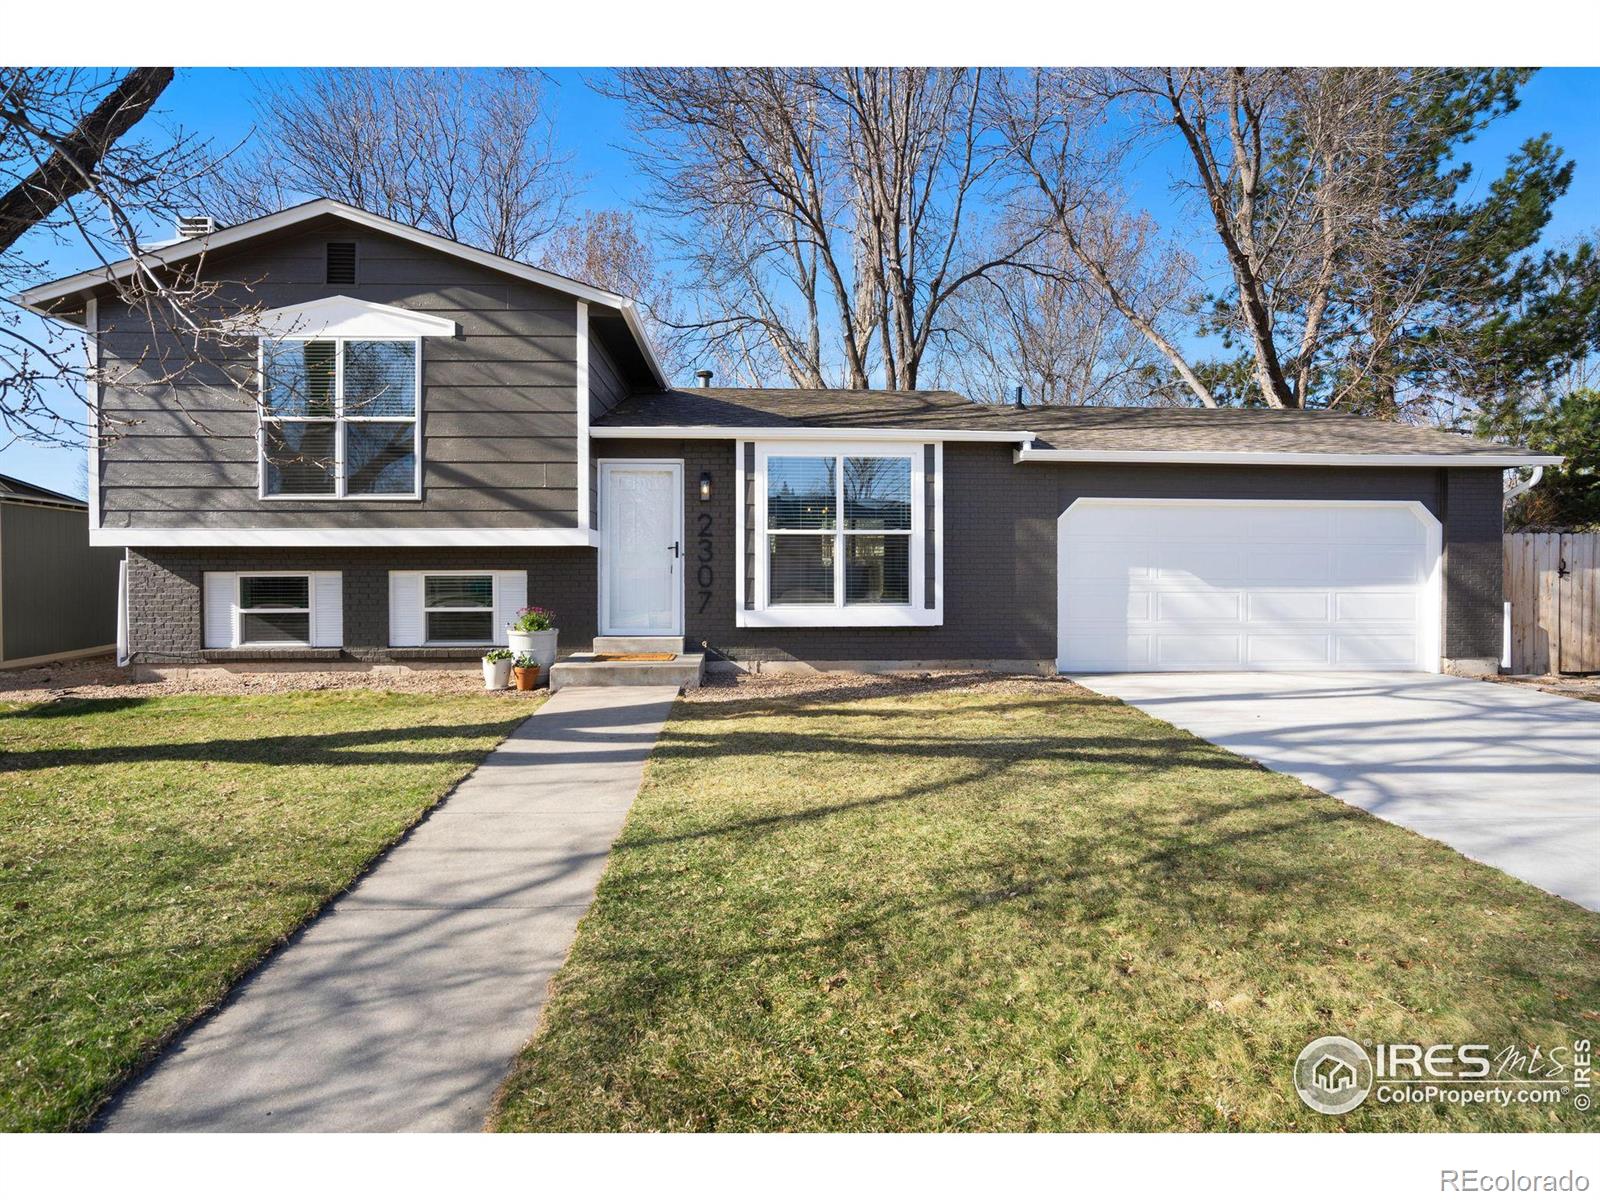 Report Image for 2307  Antelope Road,Fort Collins, Colorado